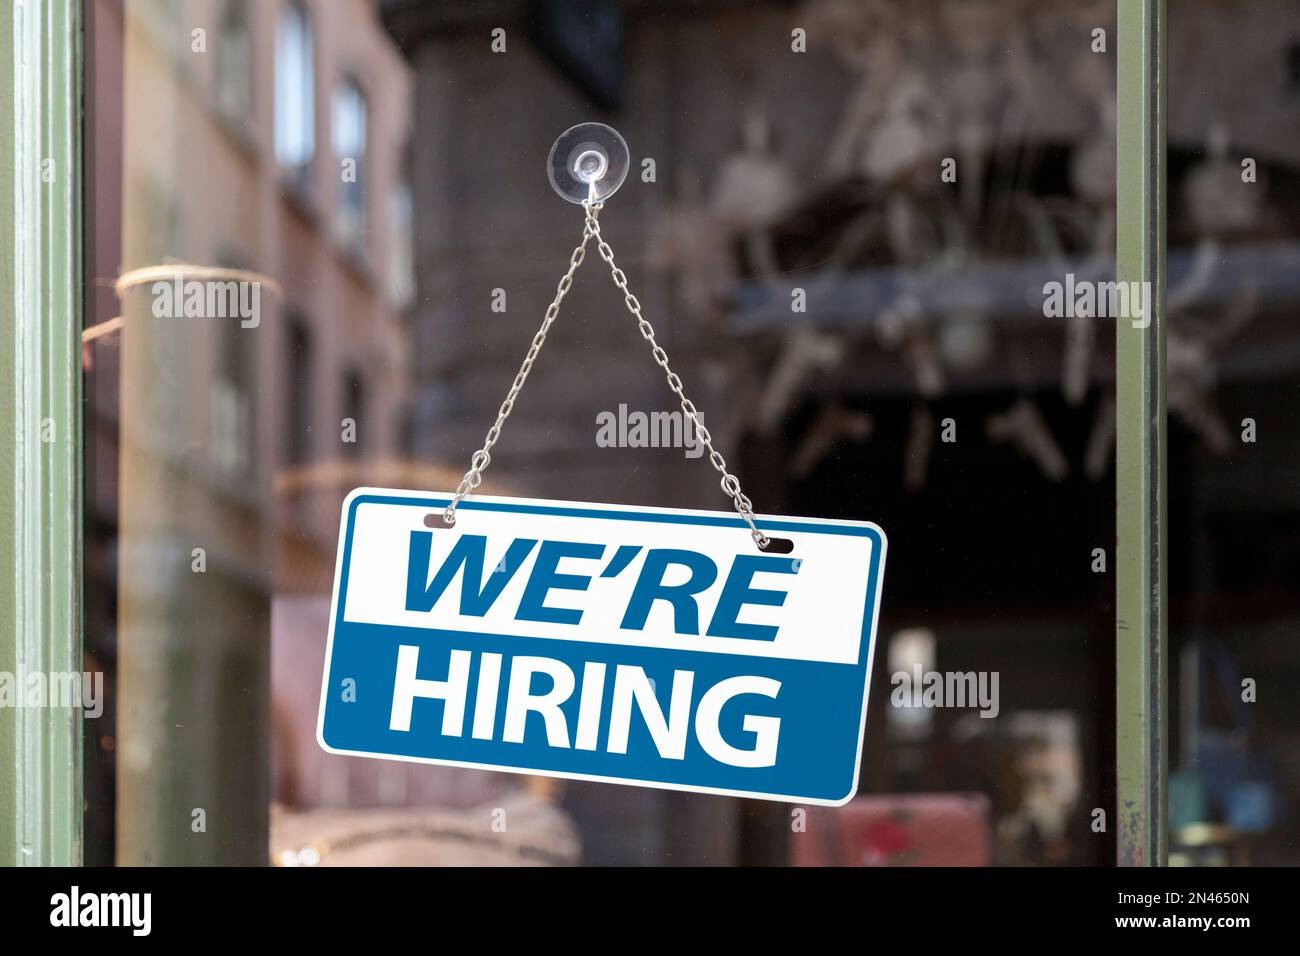 Close-up on a blue and white sign in a window with written in 'We're hiring'. Stock Photo